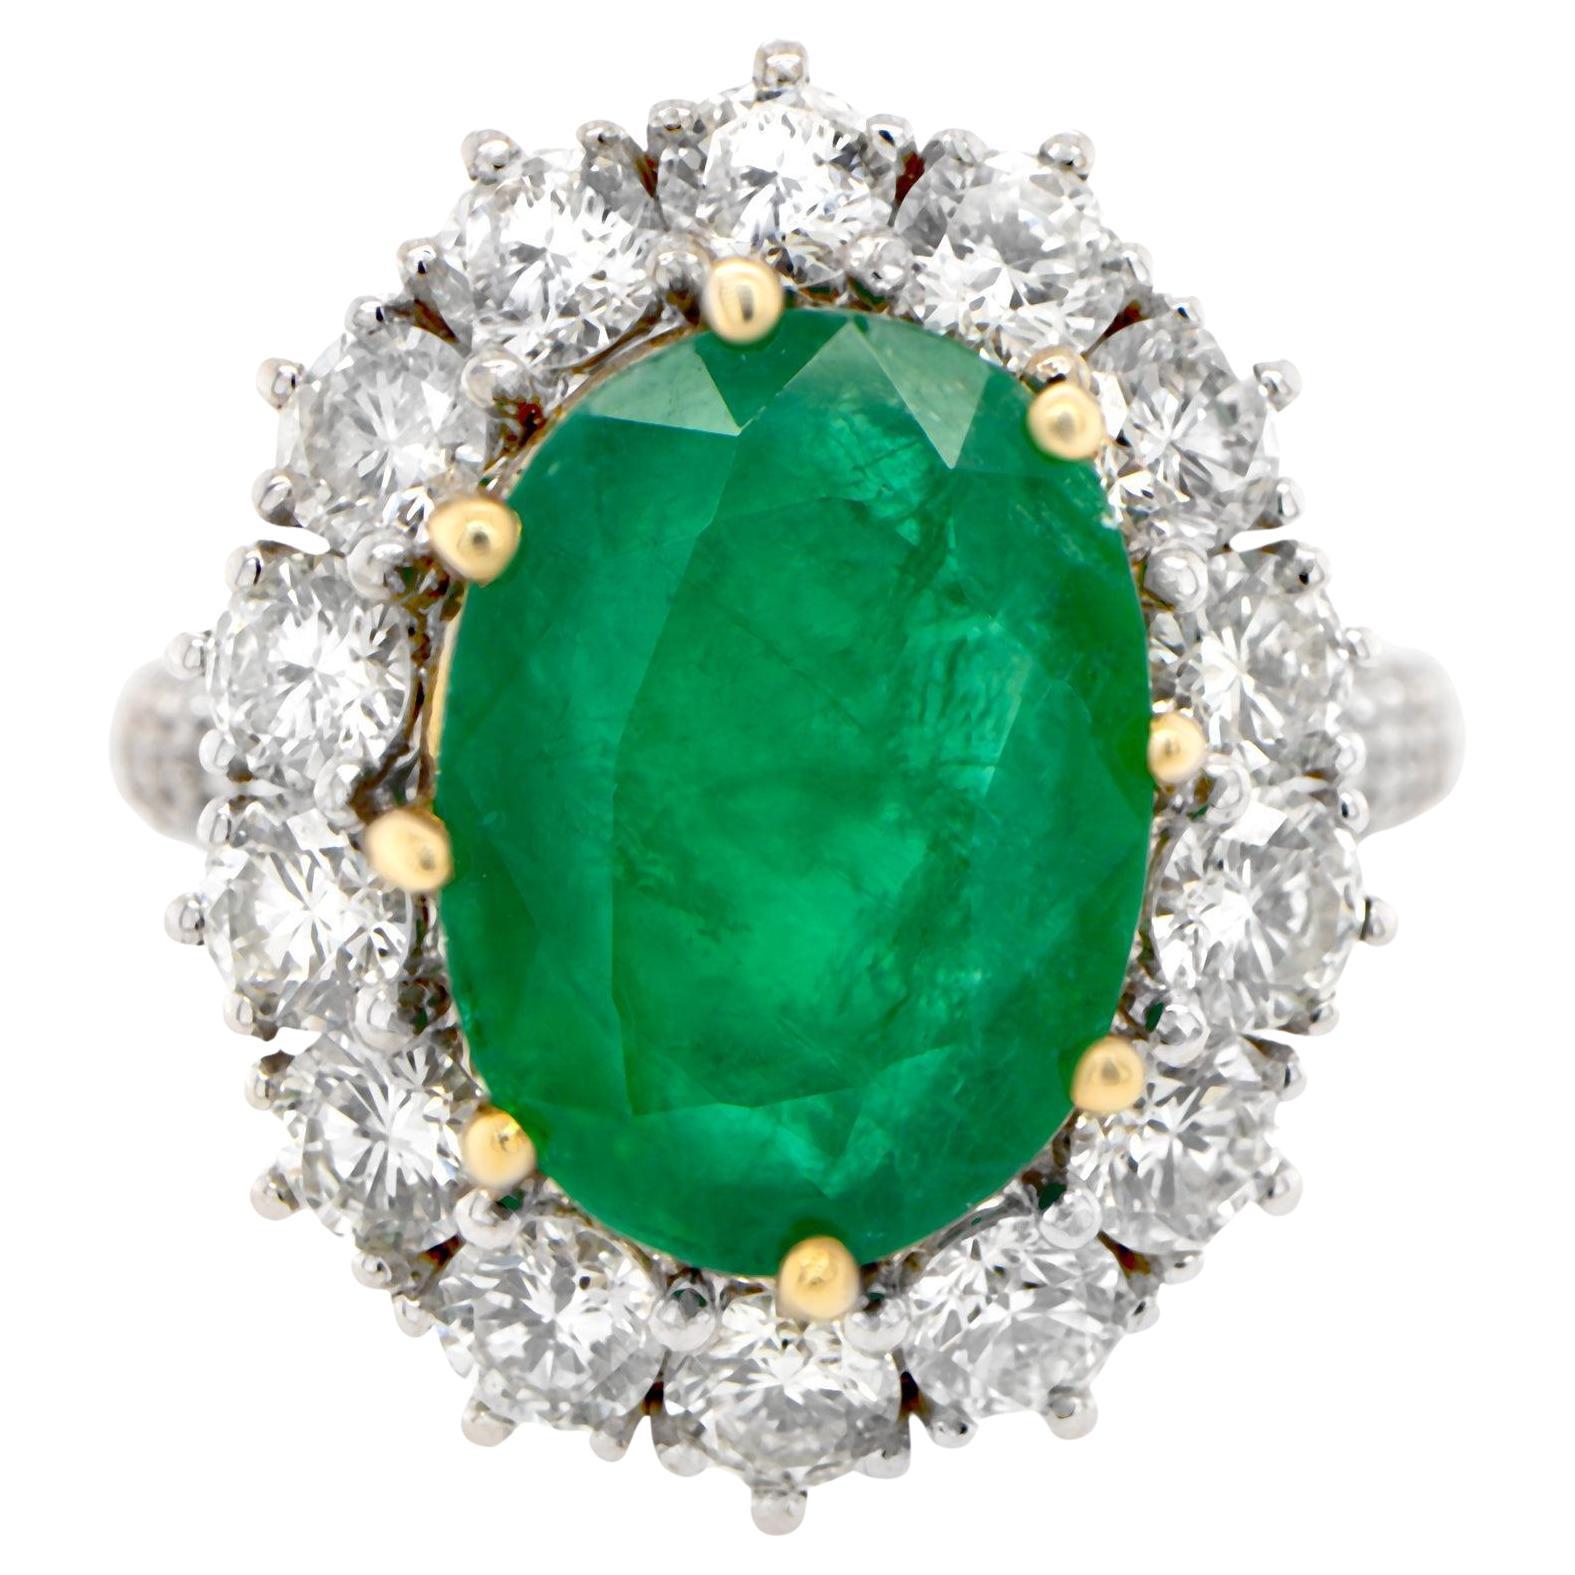 Oval Emerald Ring With Diamond Halo Setting 6.24 Carats 18K Gold For Sale